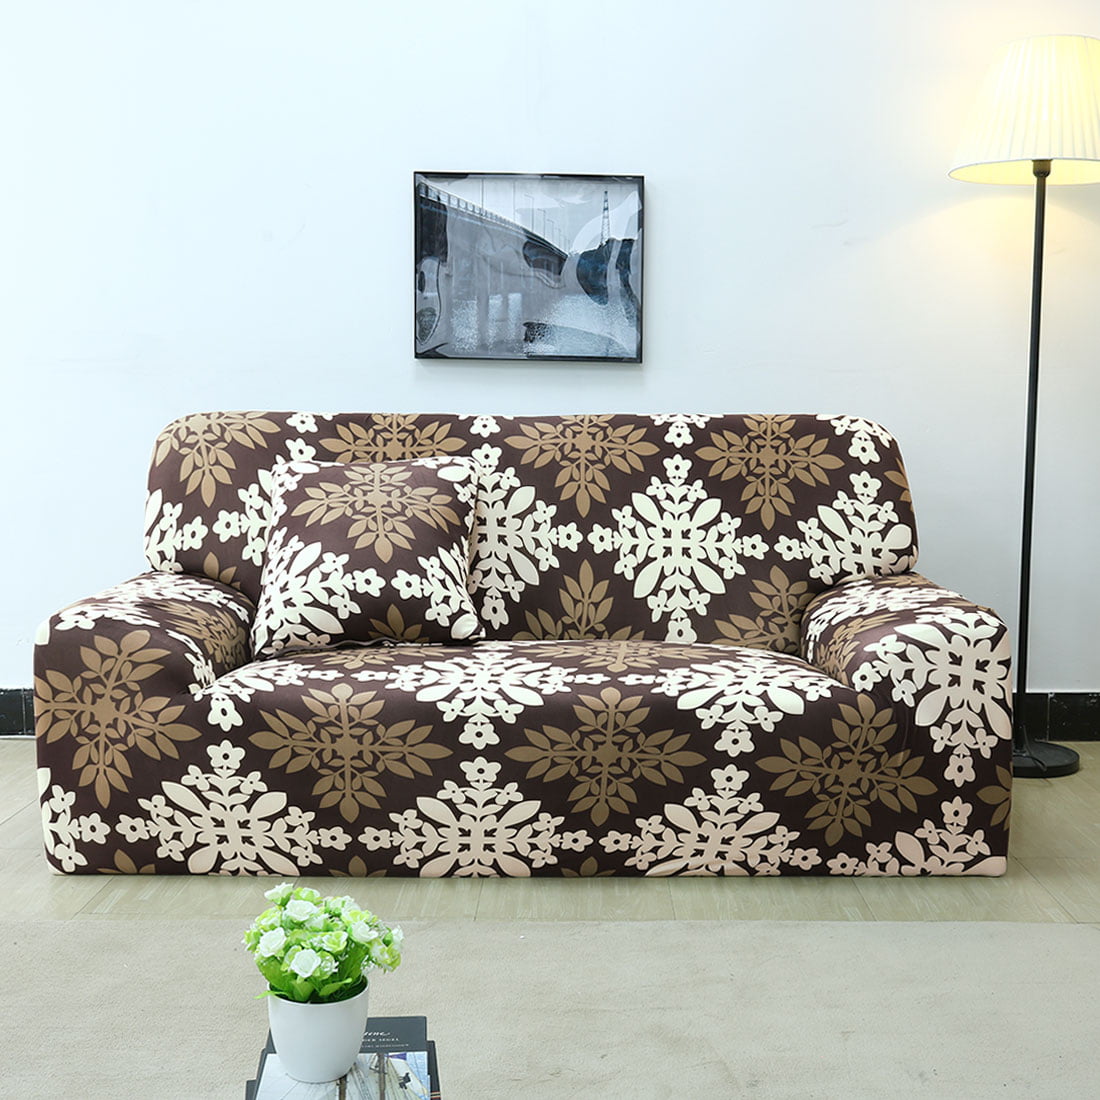 Details about   2/3-Seater Sofa Cover Chair Couch Slipcover Fabric Mat Protector Universal Cover 